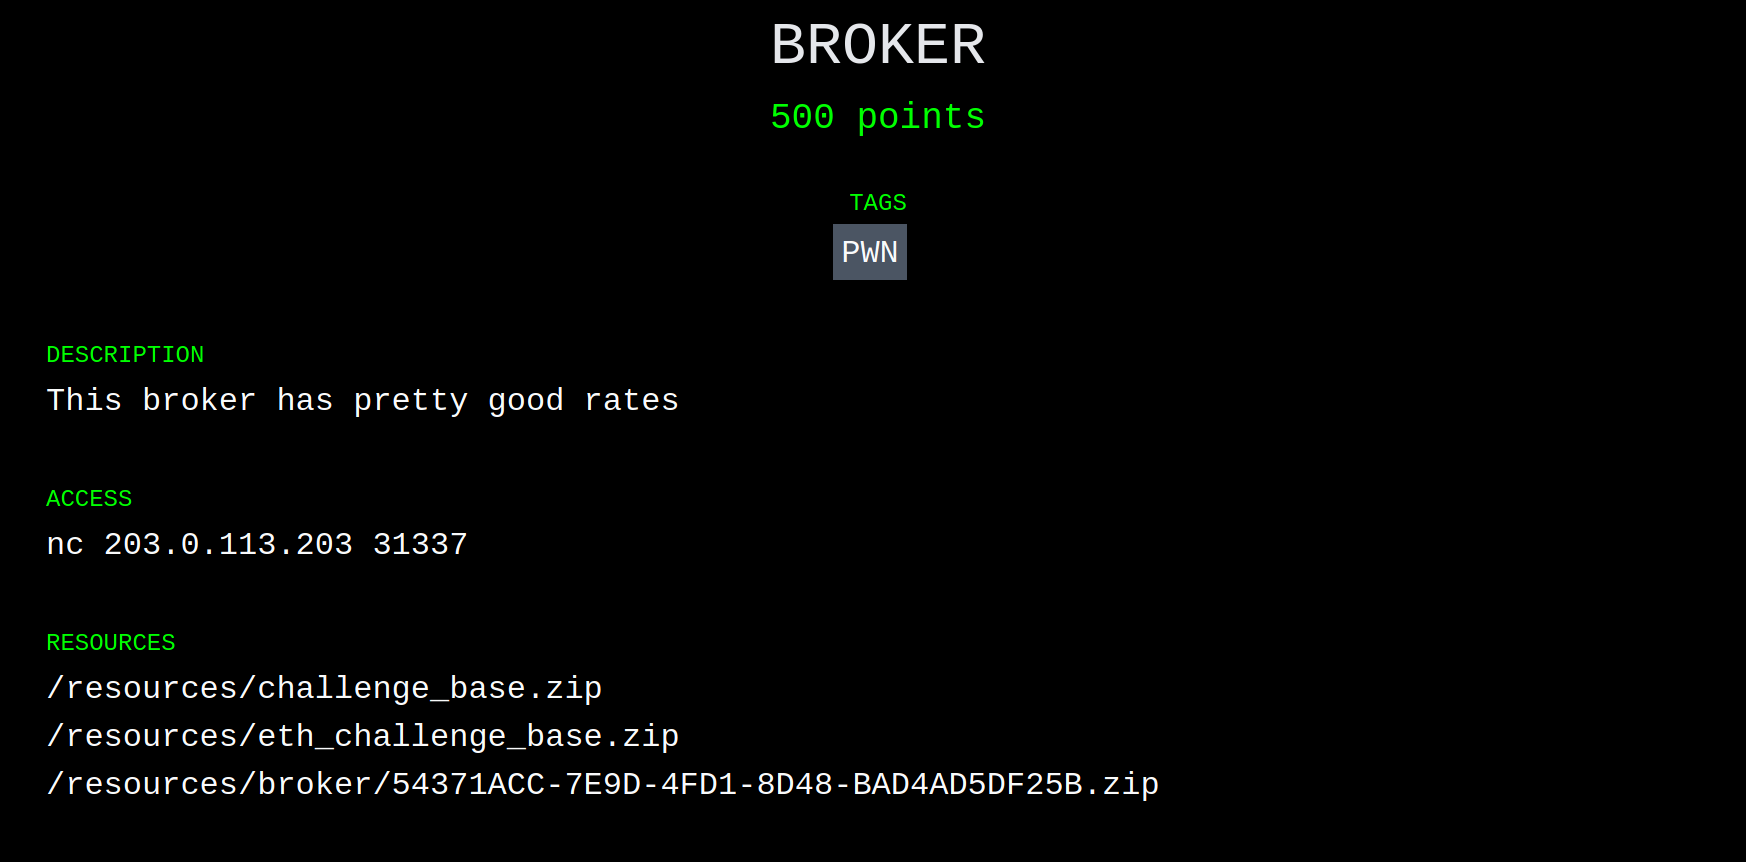 This broker has pretty good rates